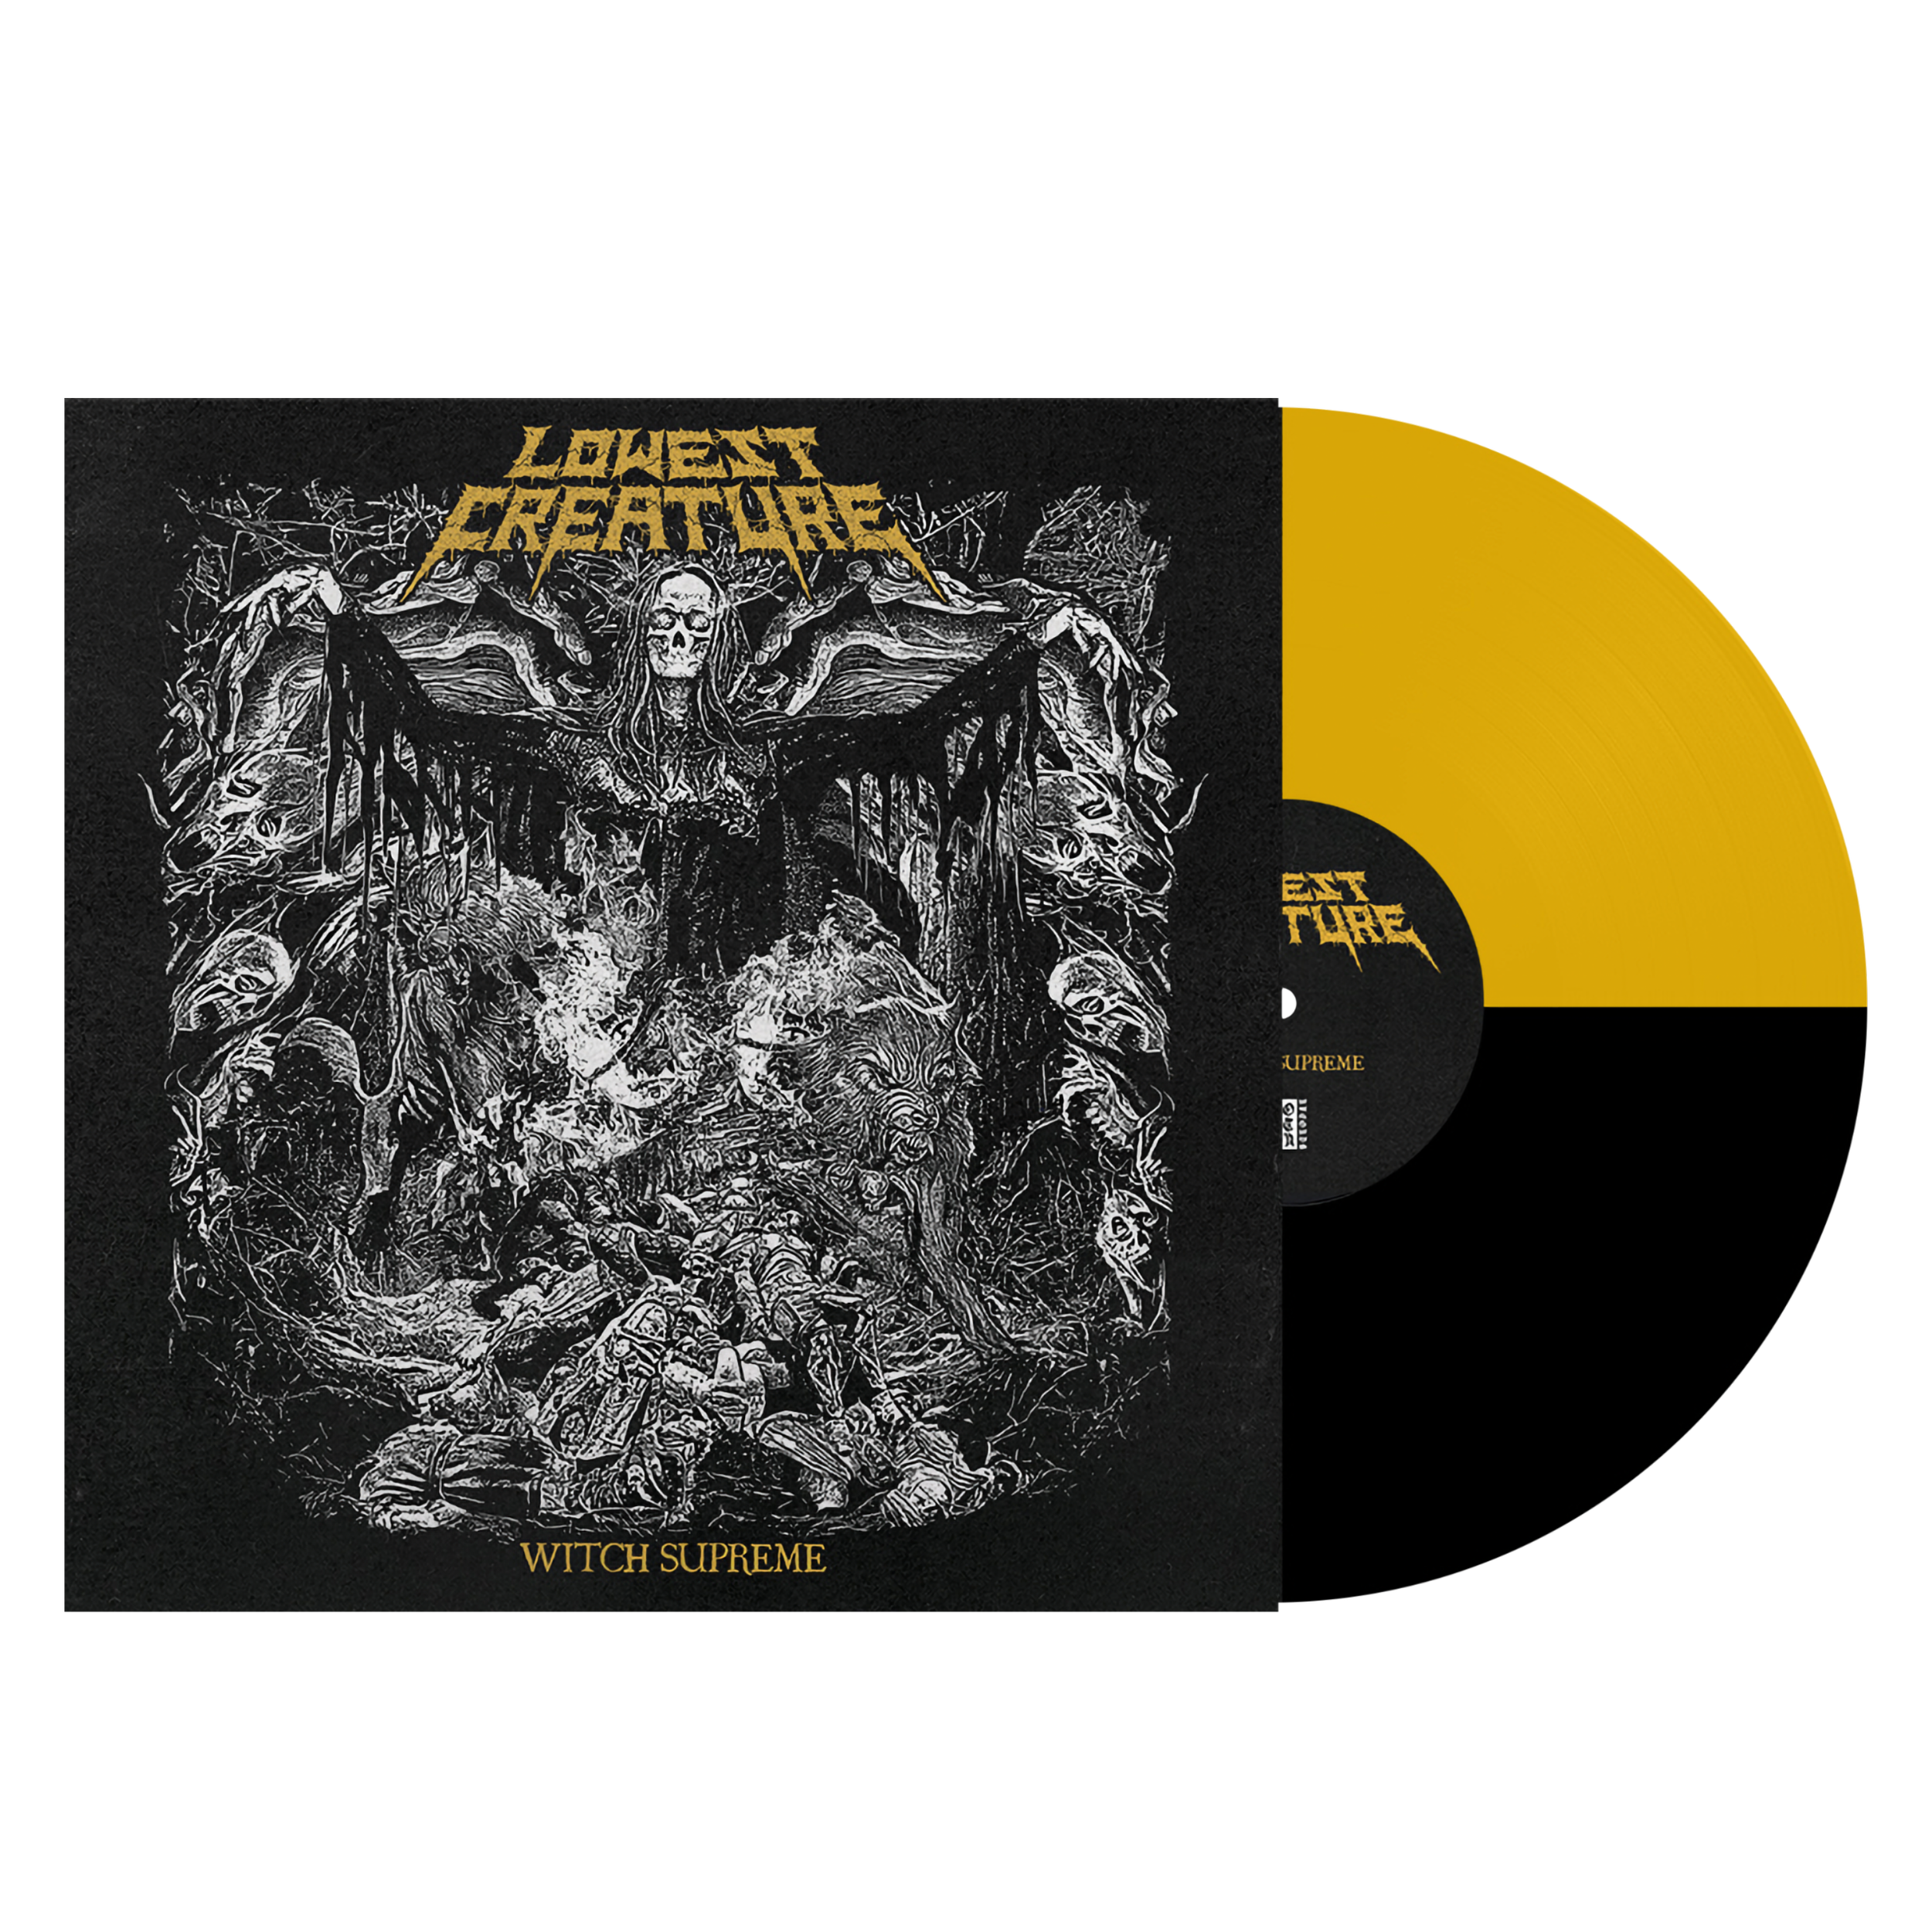 Lowest Creature - Witch Supreme - Vinyl - Black Yellow.png